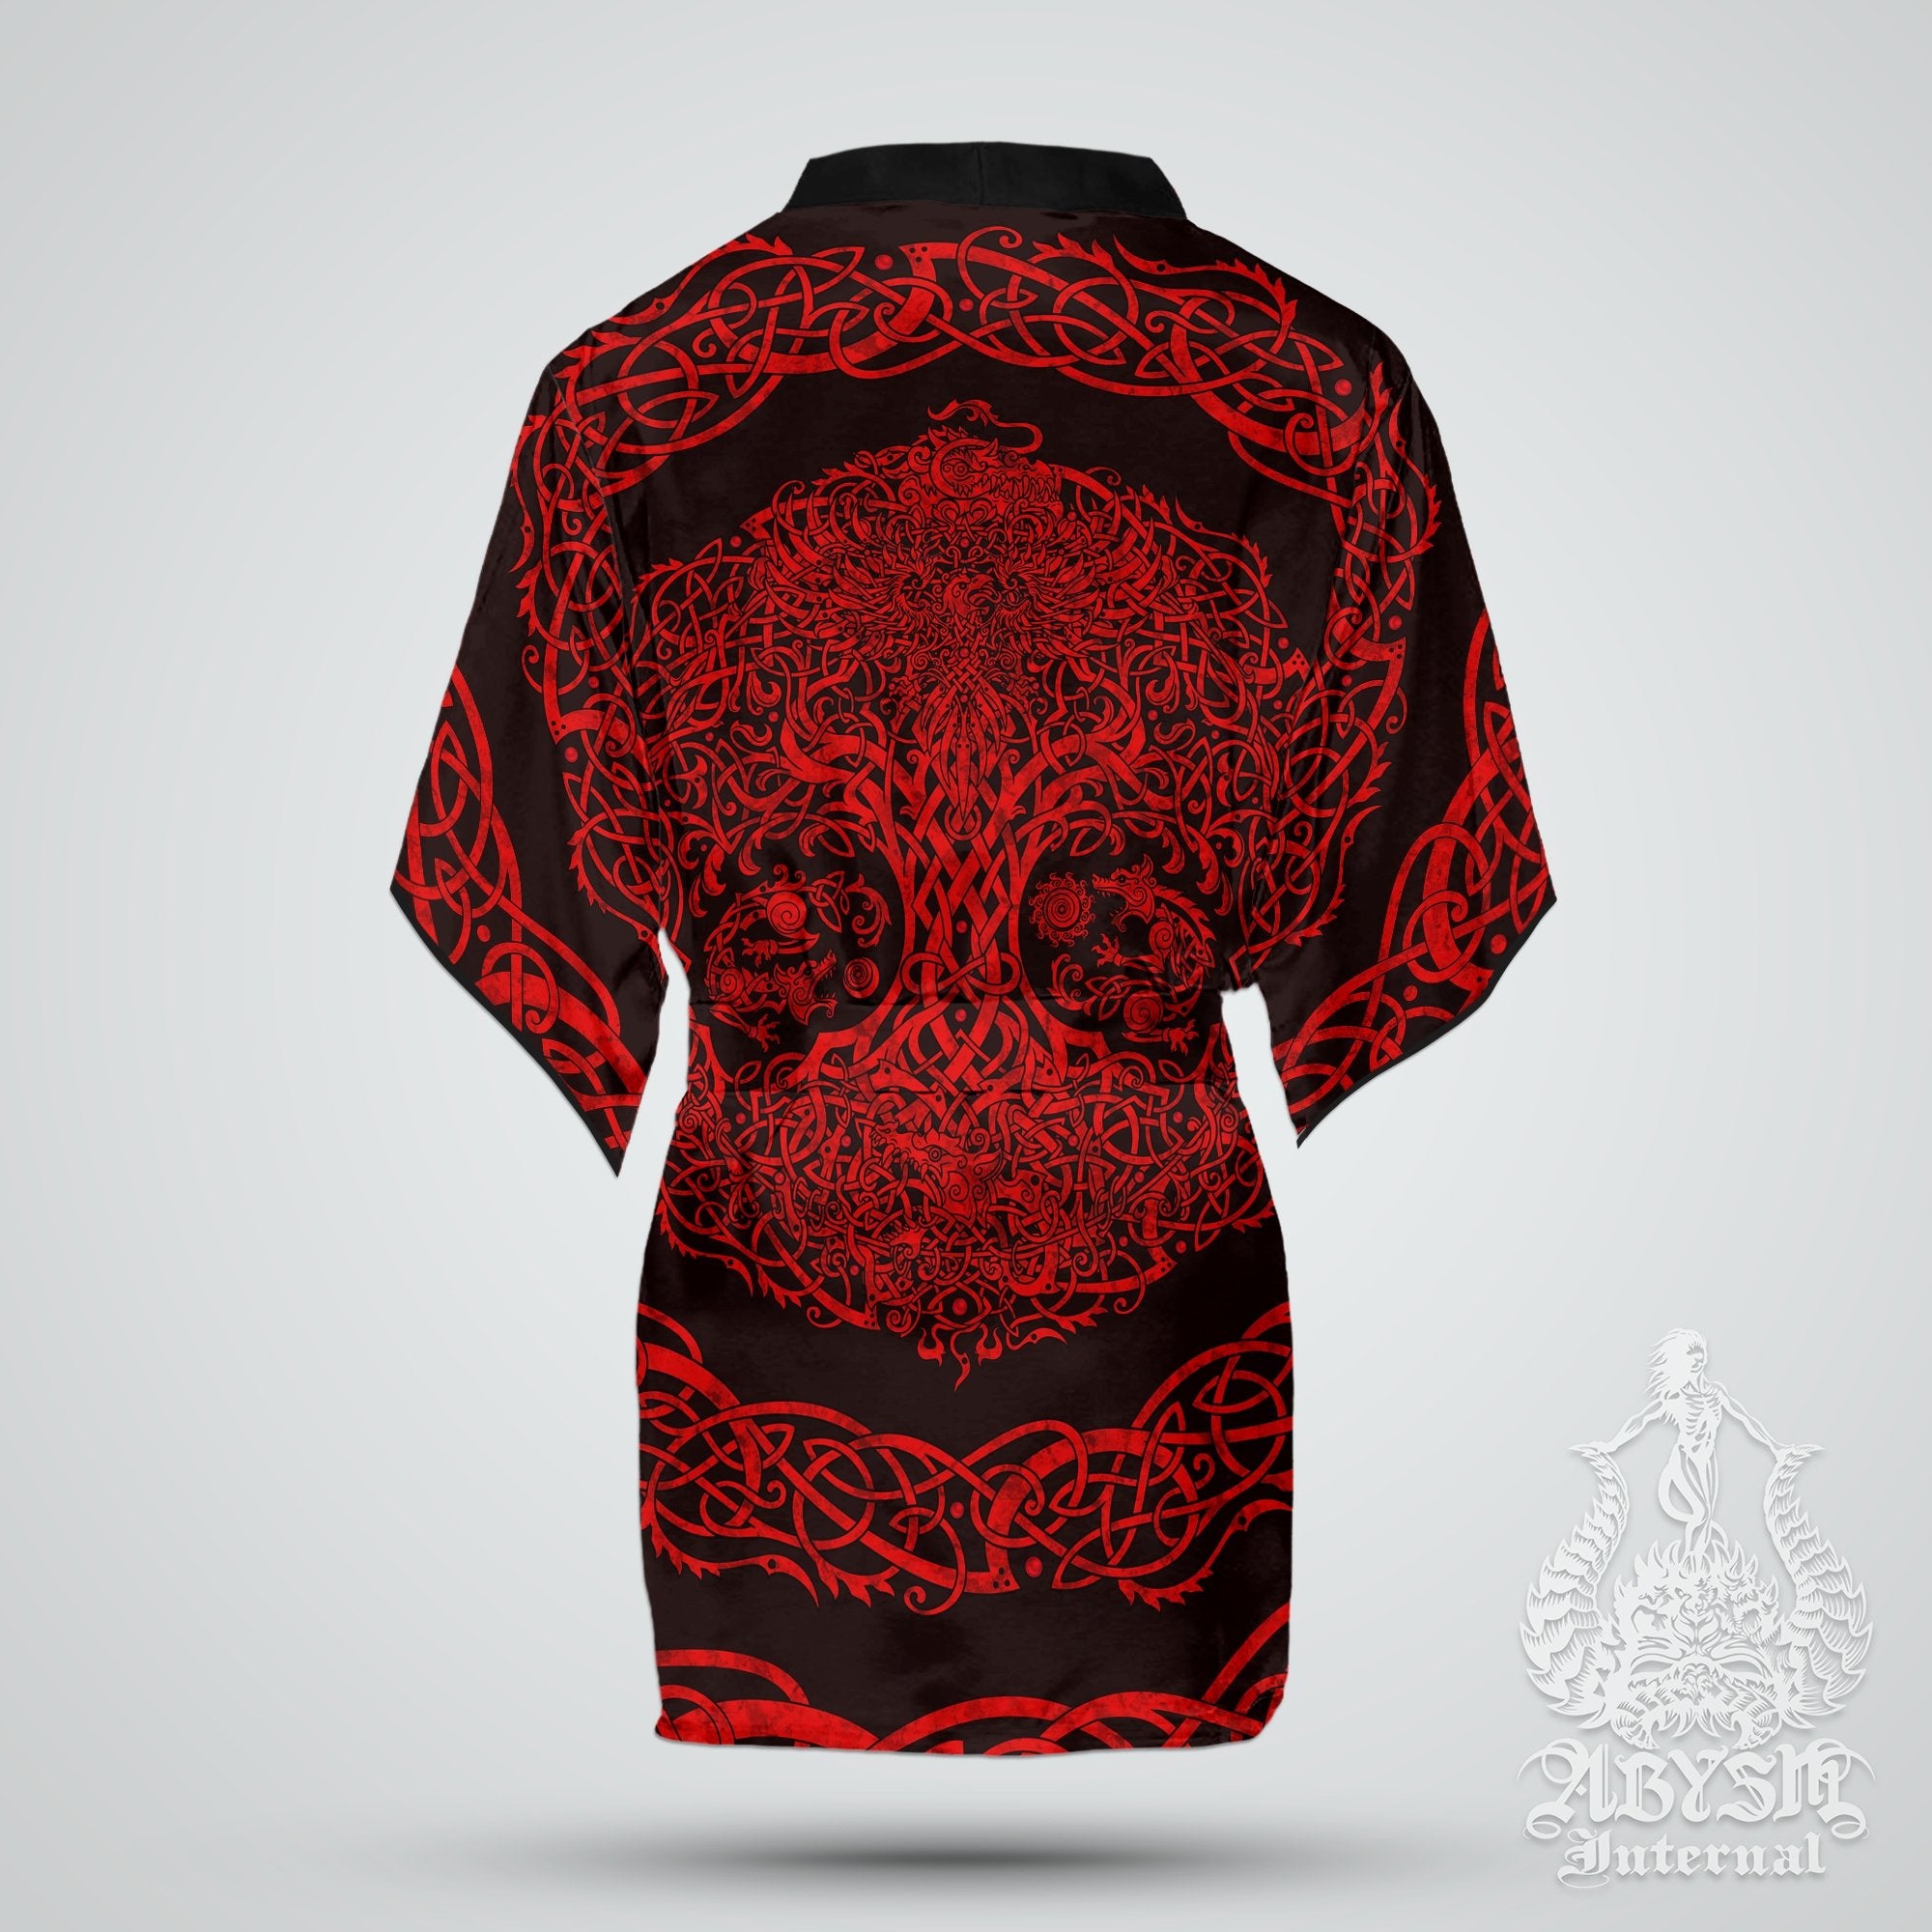 Viking Cover Up, Beach Outfit, Yggdrasil Party Kimono, Summer Festival Robe, Norse Indie and Alternative Clothing, Unisex - Tree of Life, Black Red - Abysm Internal